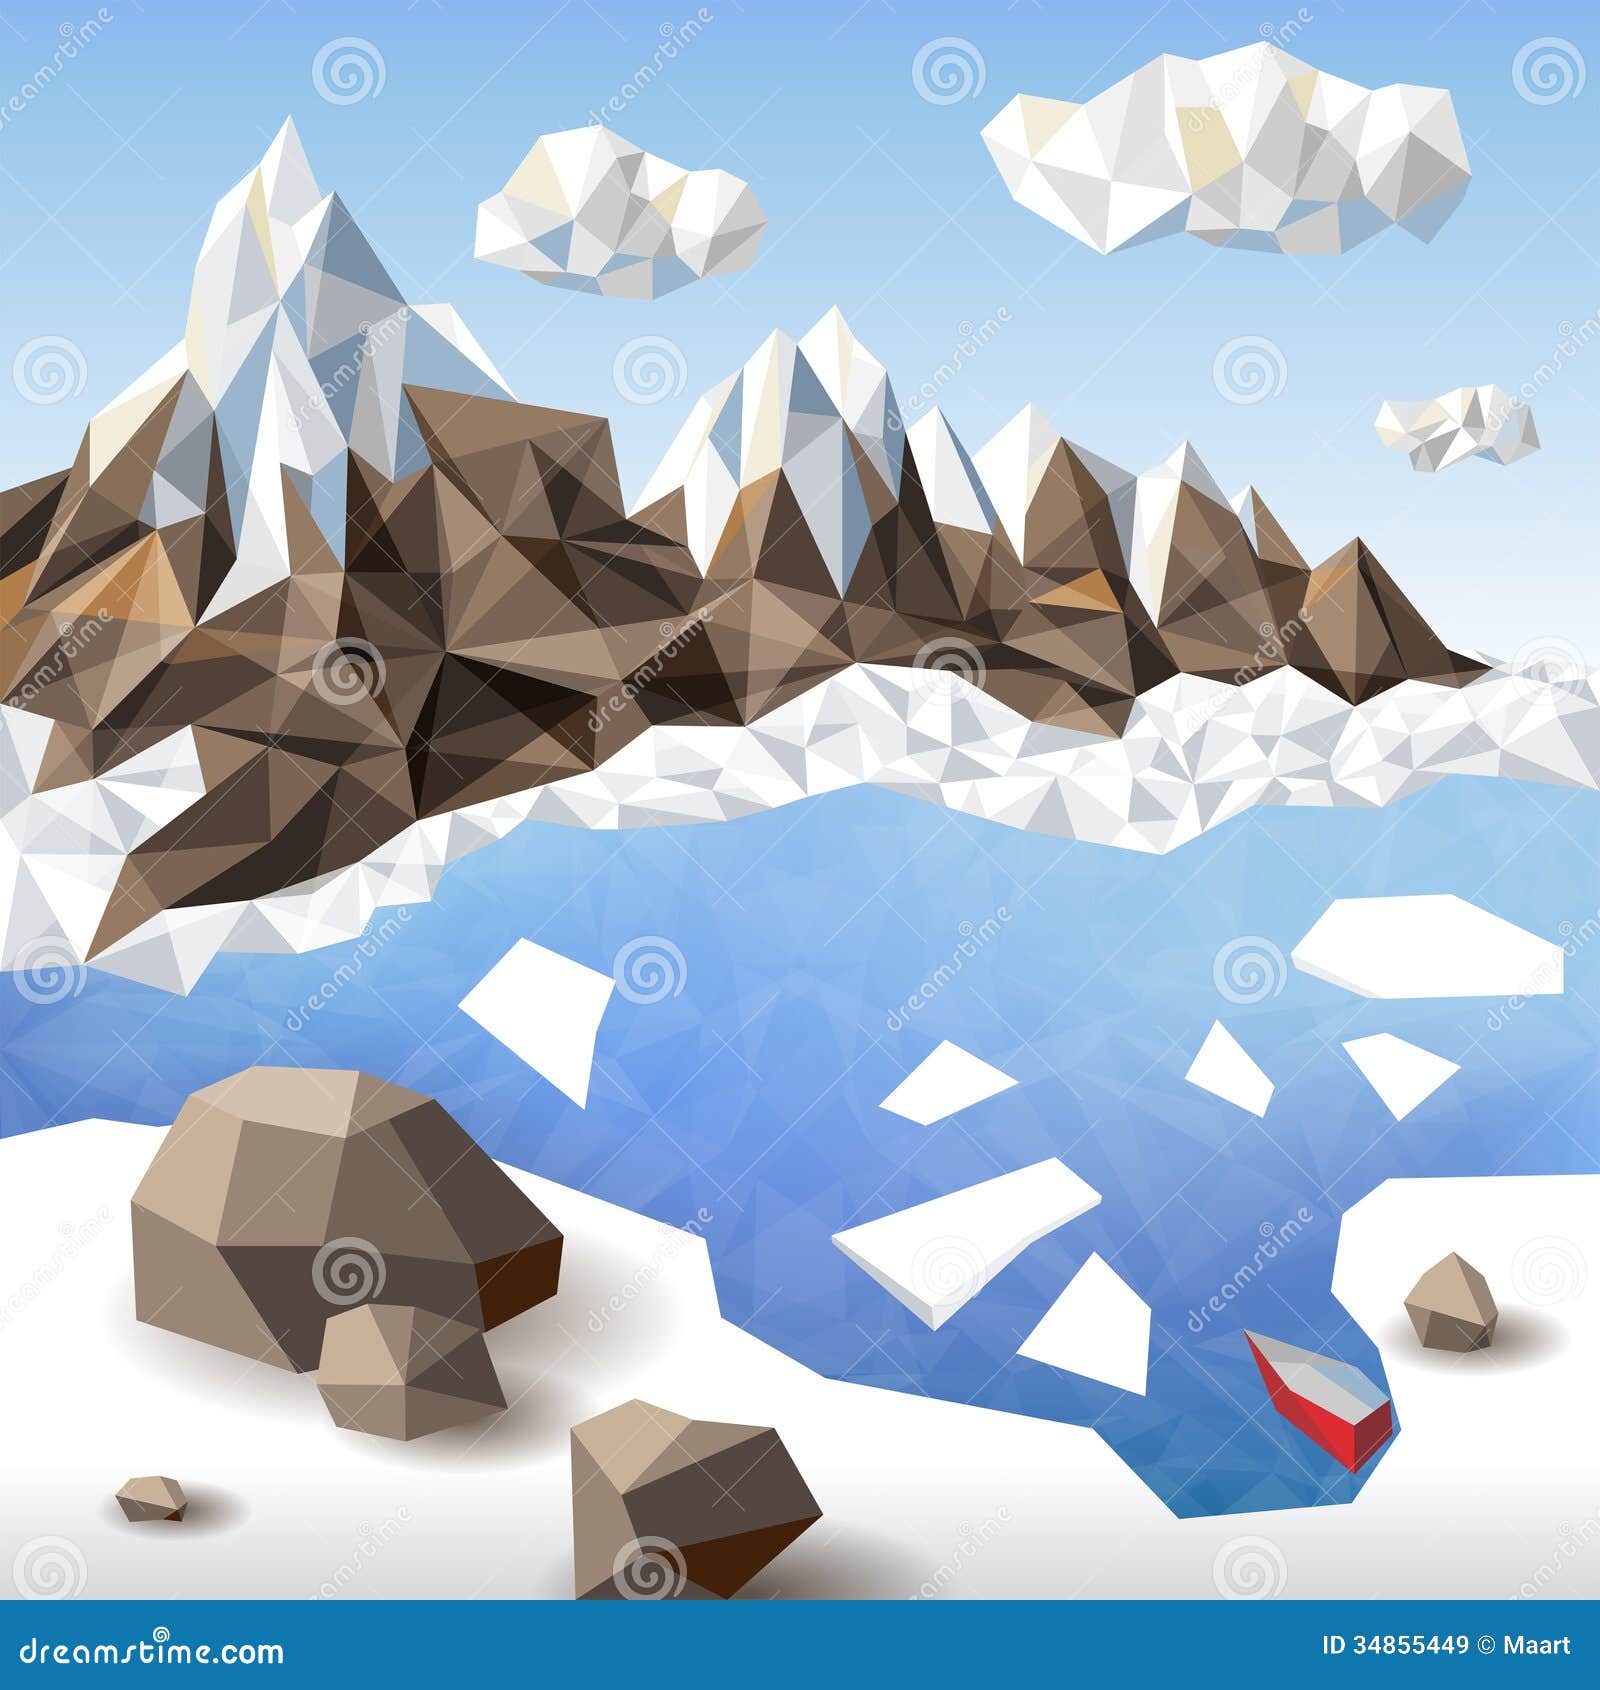 Landscape In Origami Style Royalty Free Stock Images - Image: 34855449